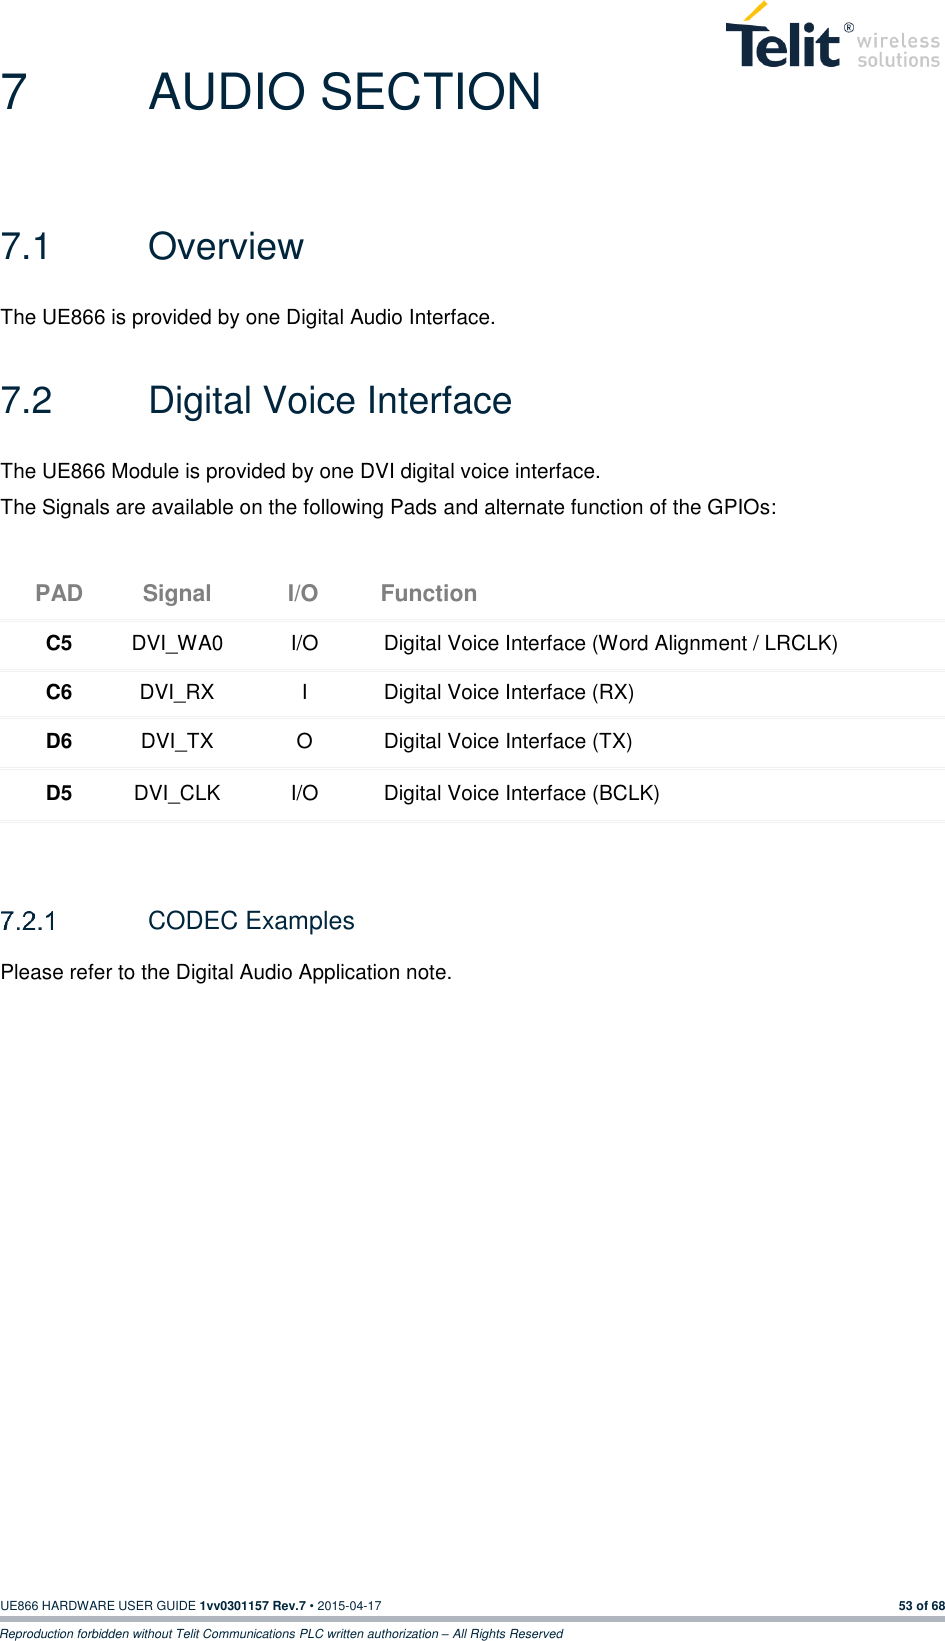  UE866 HARDWARE USER GUIDE 1vv0301157 Rev.7 • 2015-04-17 53 of 68 Reproduction forbidden without Telit Communications PLC written authorization – All Rights Reserved 7  AUDIO SECTION 7.1  Overview The UE866 is provided by one Digital Audio Interface. 7.2  Digital Voice Interface The UE866 Module is provided by one DVI digital voice interface. The Signals are available on the following Pads and alternate function of the GPIOs: PAD Signal I/O Function C5 DVI_WA0 I/O Digital Voice Interface (Word Alignment / LRCLK) C6 DVI_RX I Digital Voice Interface (RX) D6 DVI_TX O Digital Voice Interface (TX) D5 DVI_CLK I/O Digital Voice Interface (BCLK)    CODEC Examples Please refer to the Digital Audio Application note.  